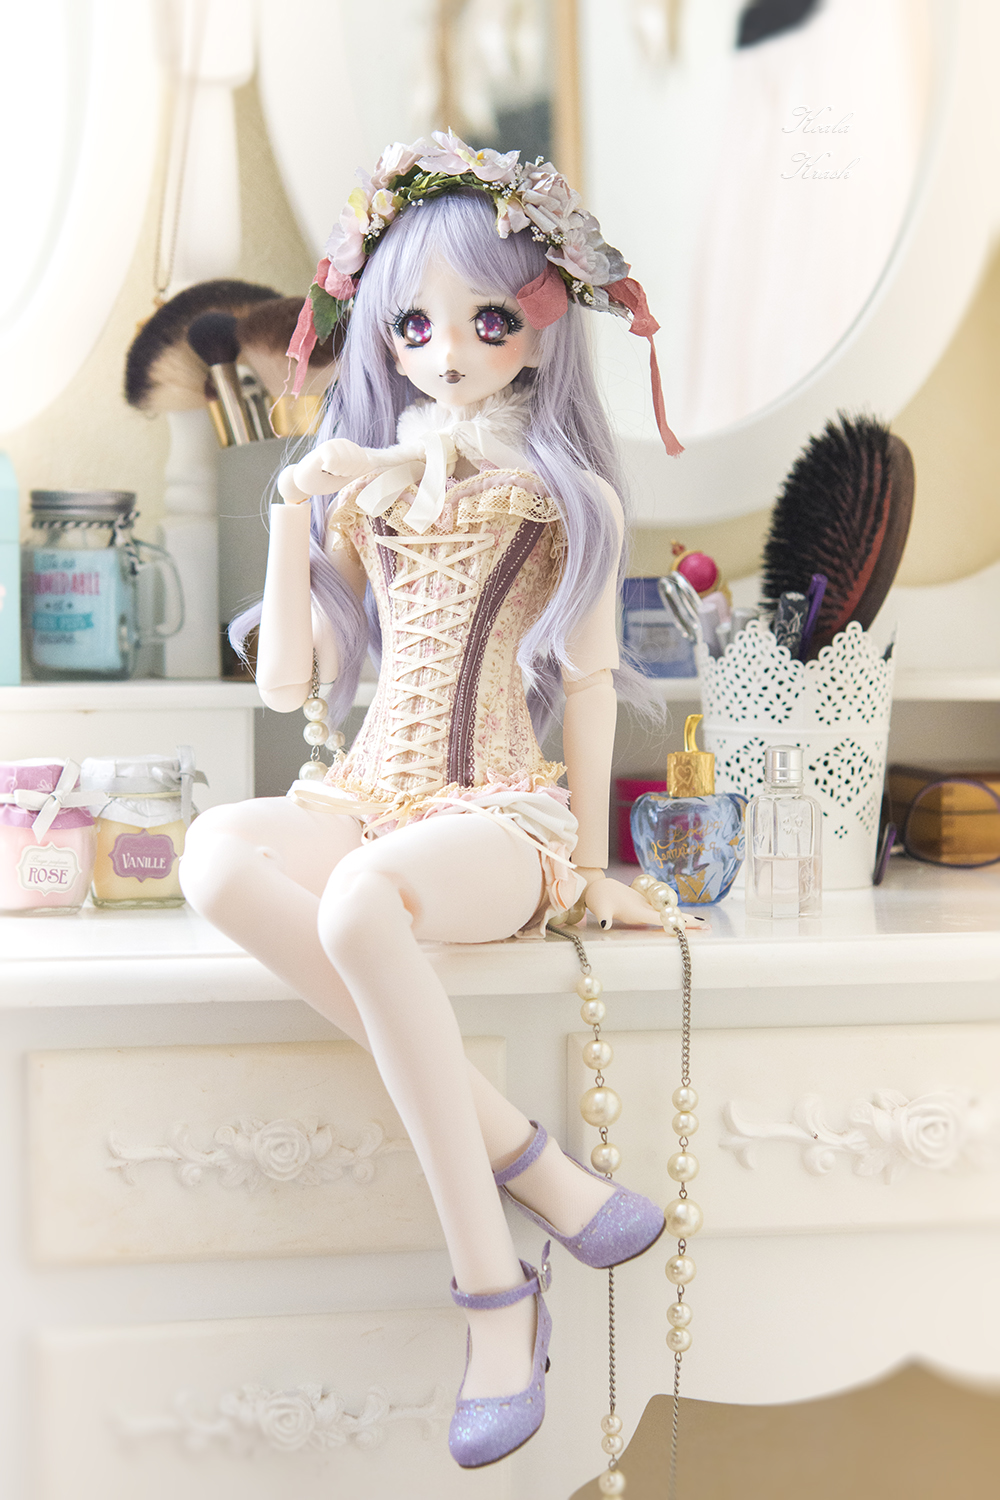 [Dollfie Icon / Dollfie Dream]   ✧* ✧*  Cooking time !  // The Fox Knight  *✧ *✧ - Page 16 33518802778_dcf44cd821_o